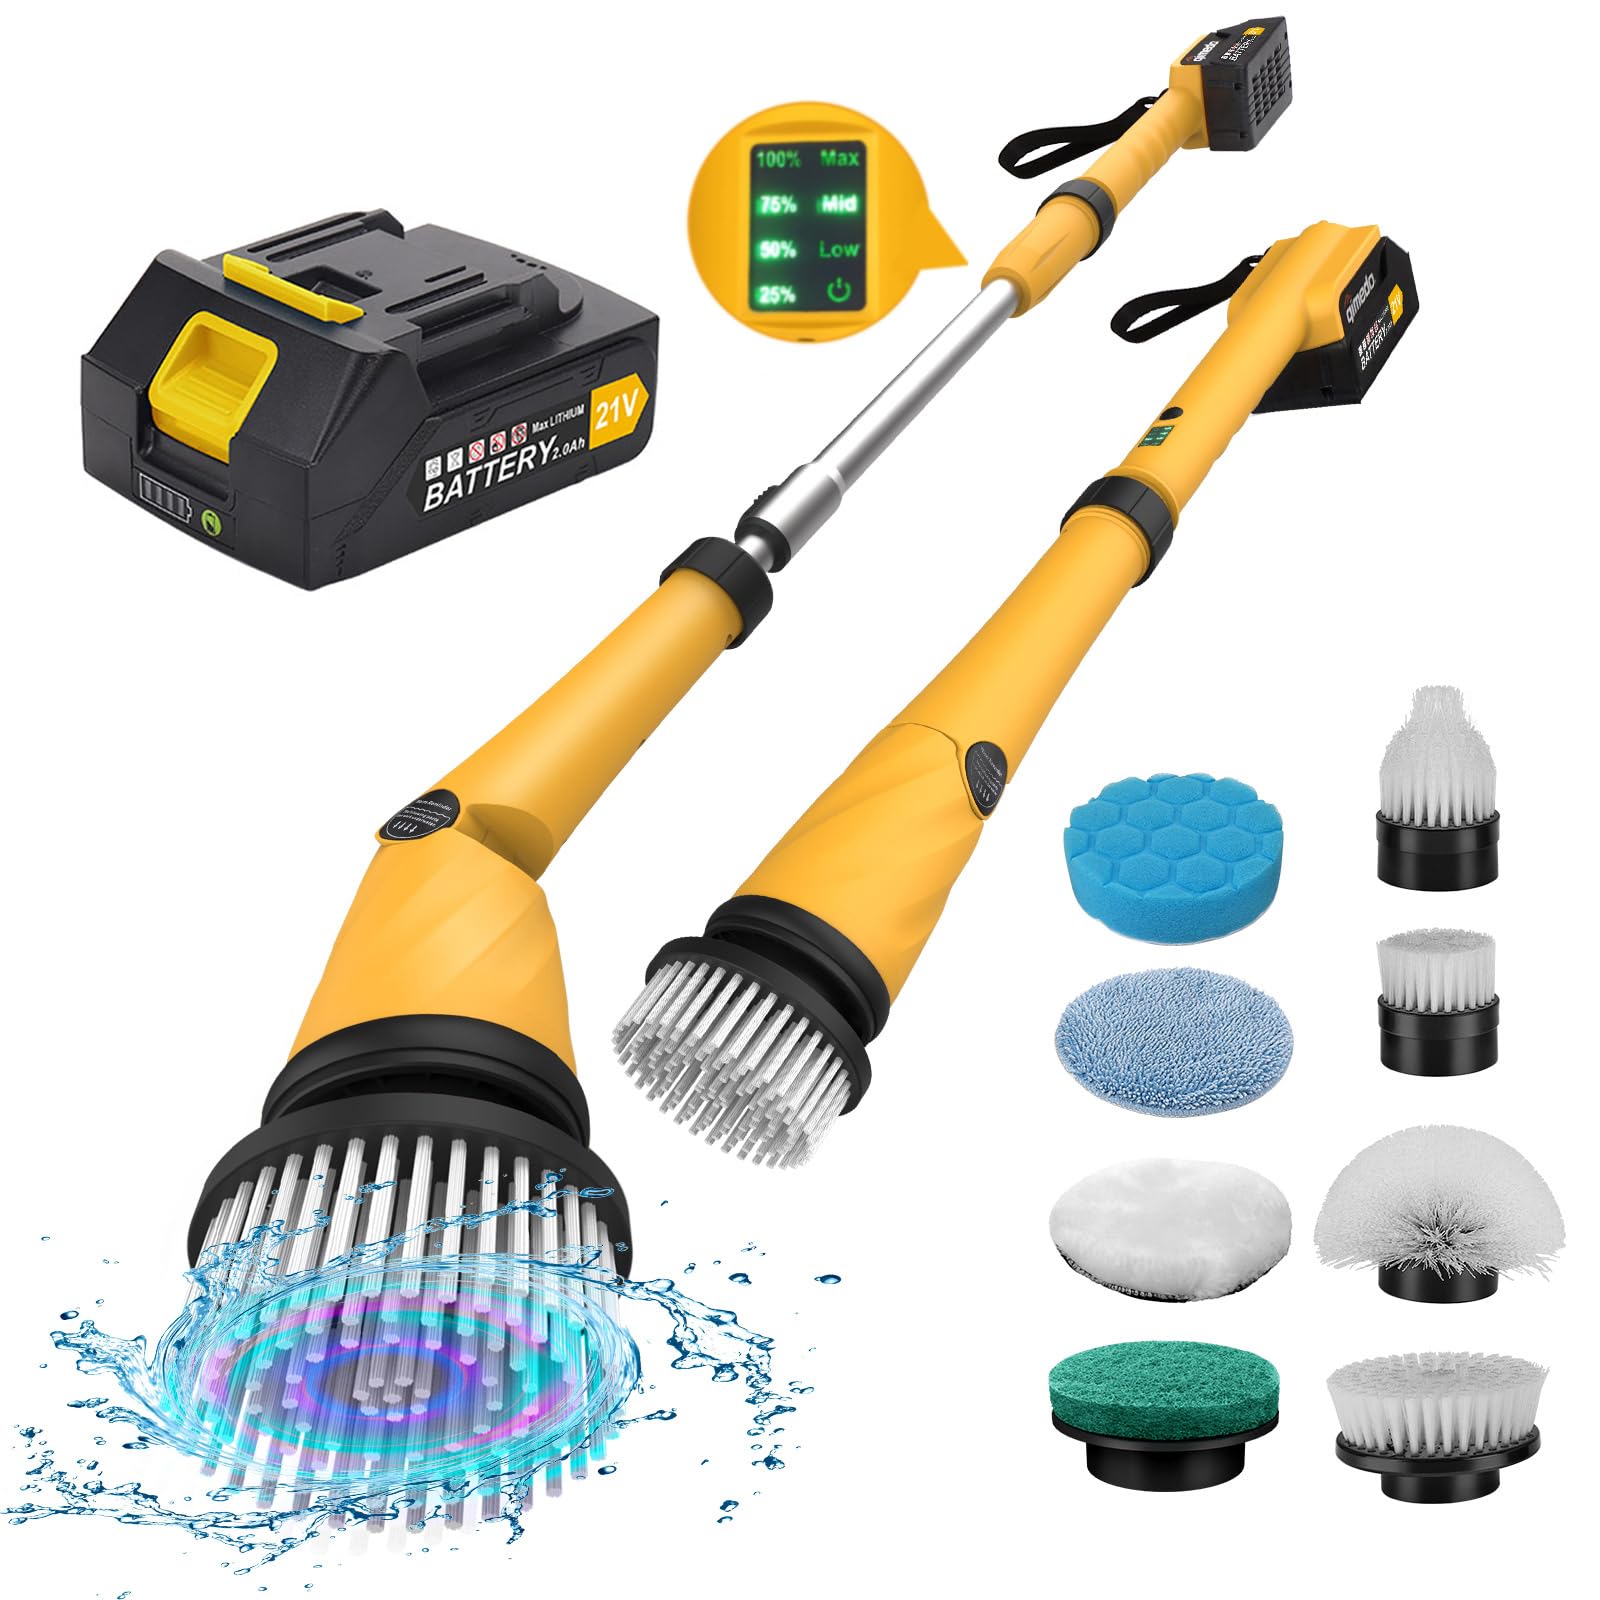 qimedo 1200 RPM Battery Electric Spin Scrubber, Highly Powerful Cordless Cleaning Brush with Smart Display, Electric Tile Floor Scrubber with 8 Brushes, Battery Powered Shower Scrubber